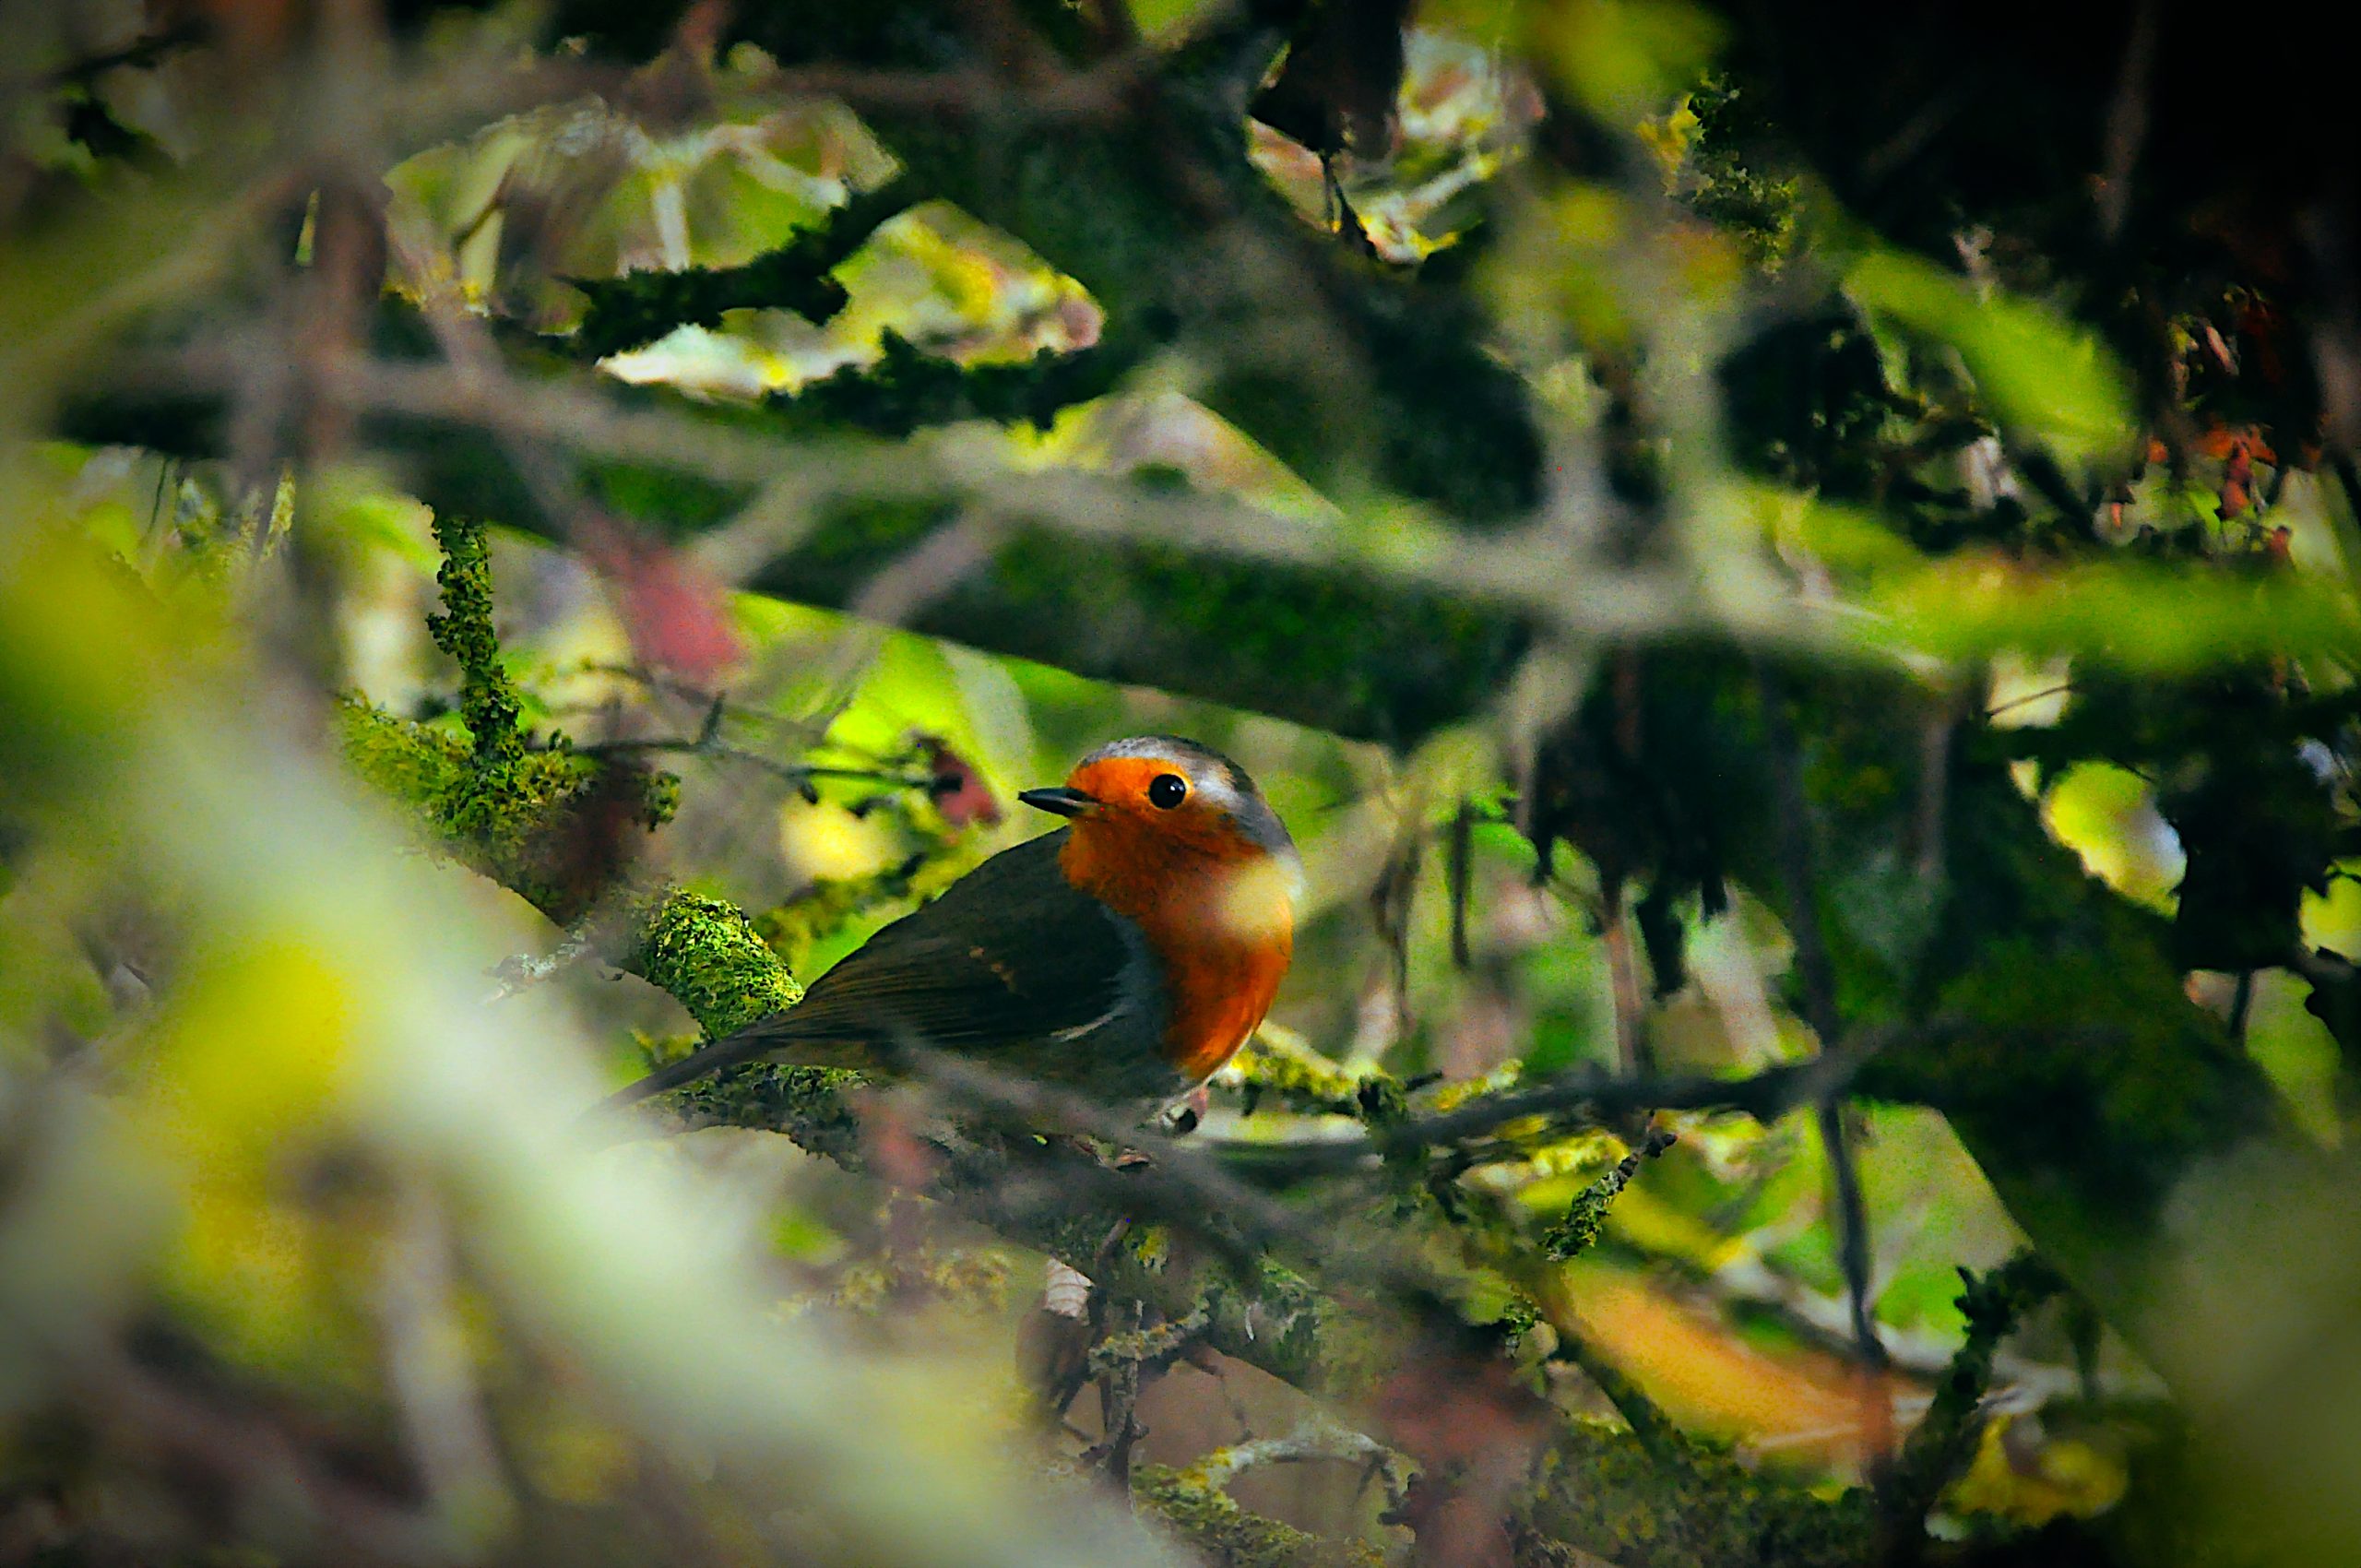  robin was nestled among the branches.